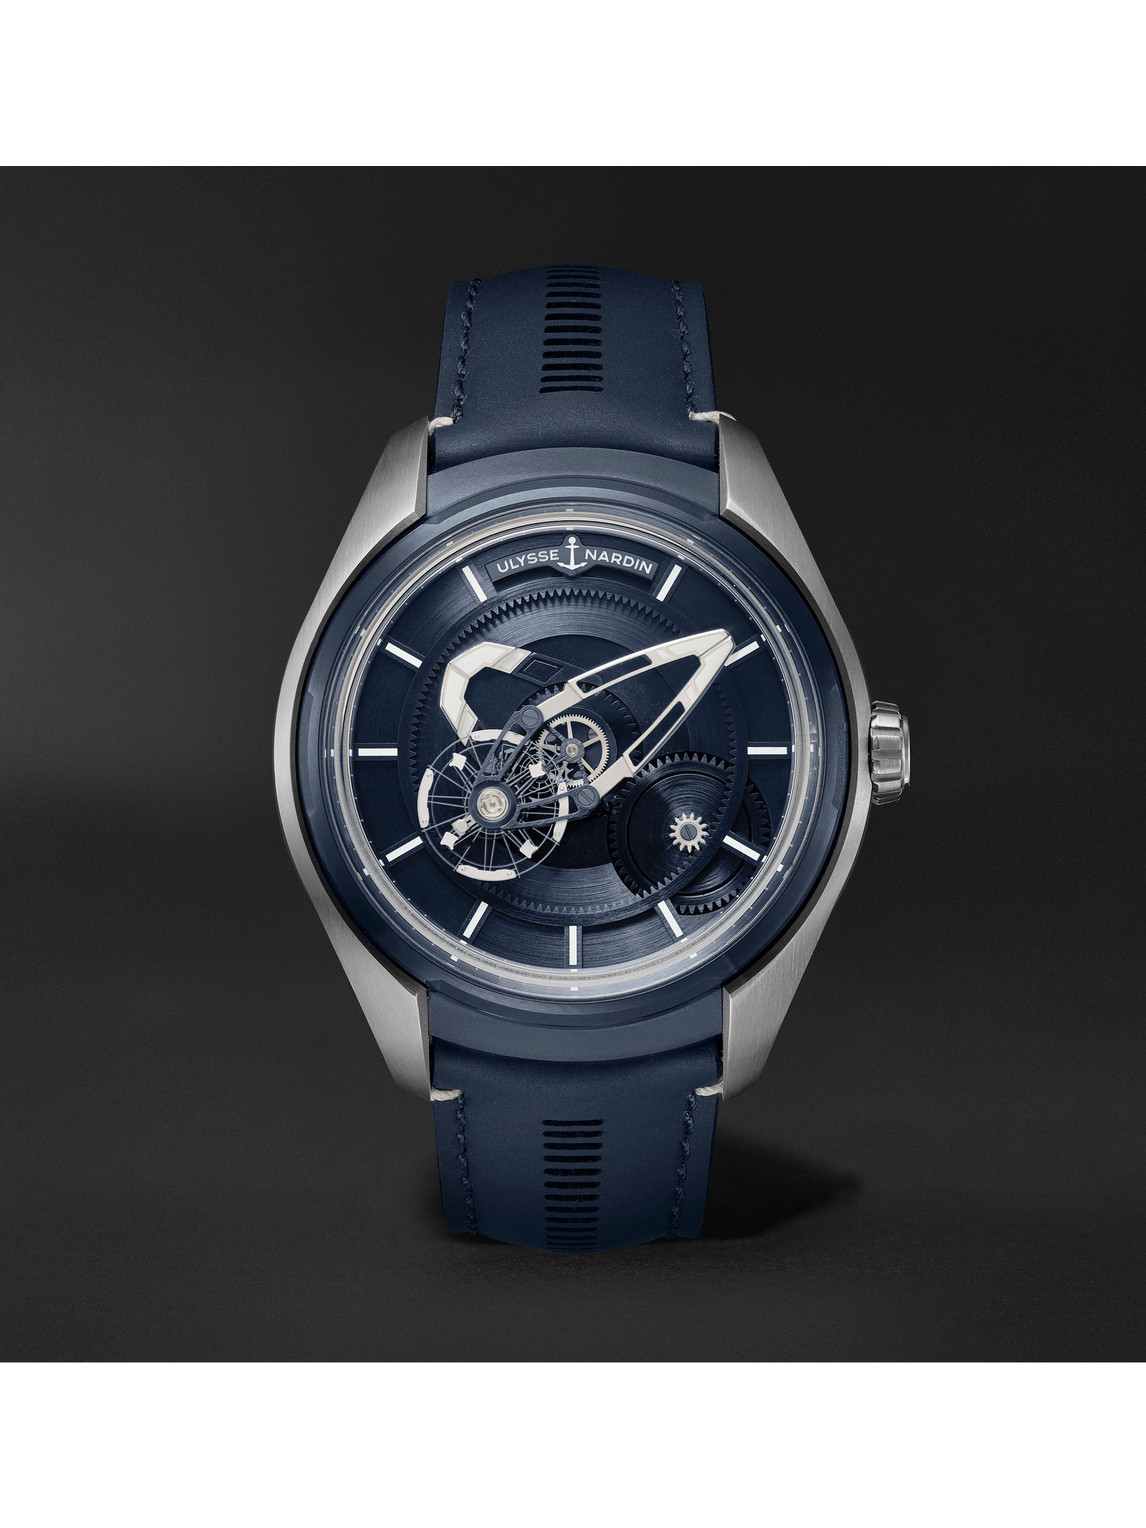 Freak X Automatic 43mm Titanium and Leather Watch, Ref. No. 2303-270.1/03